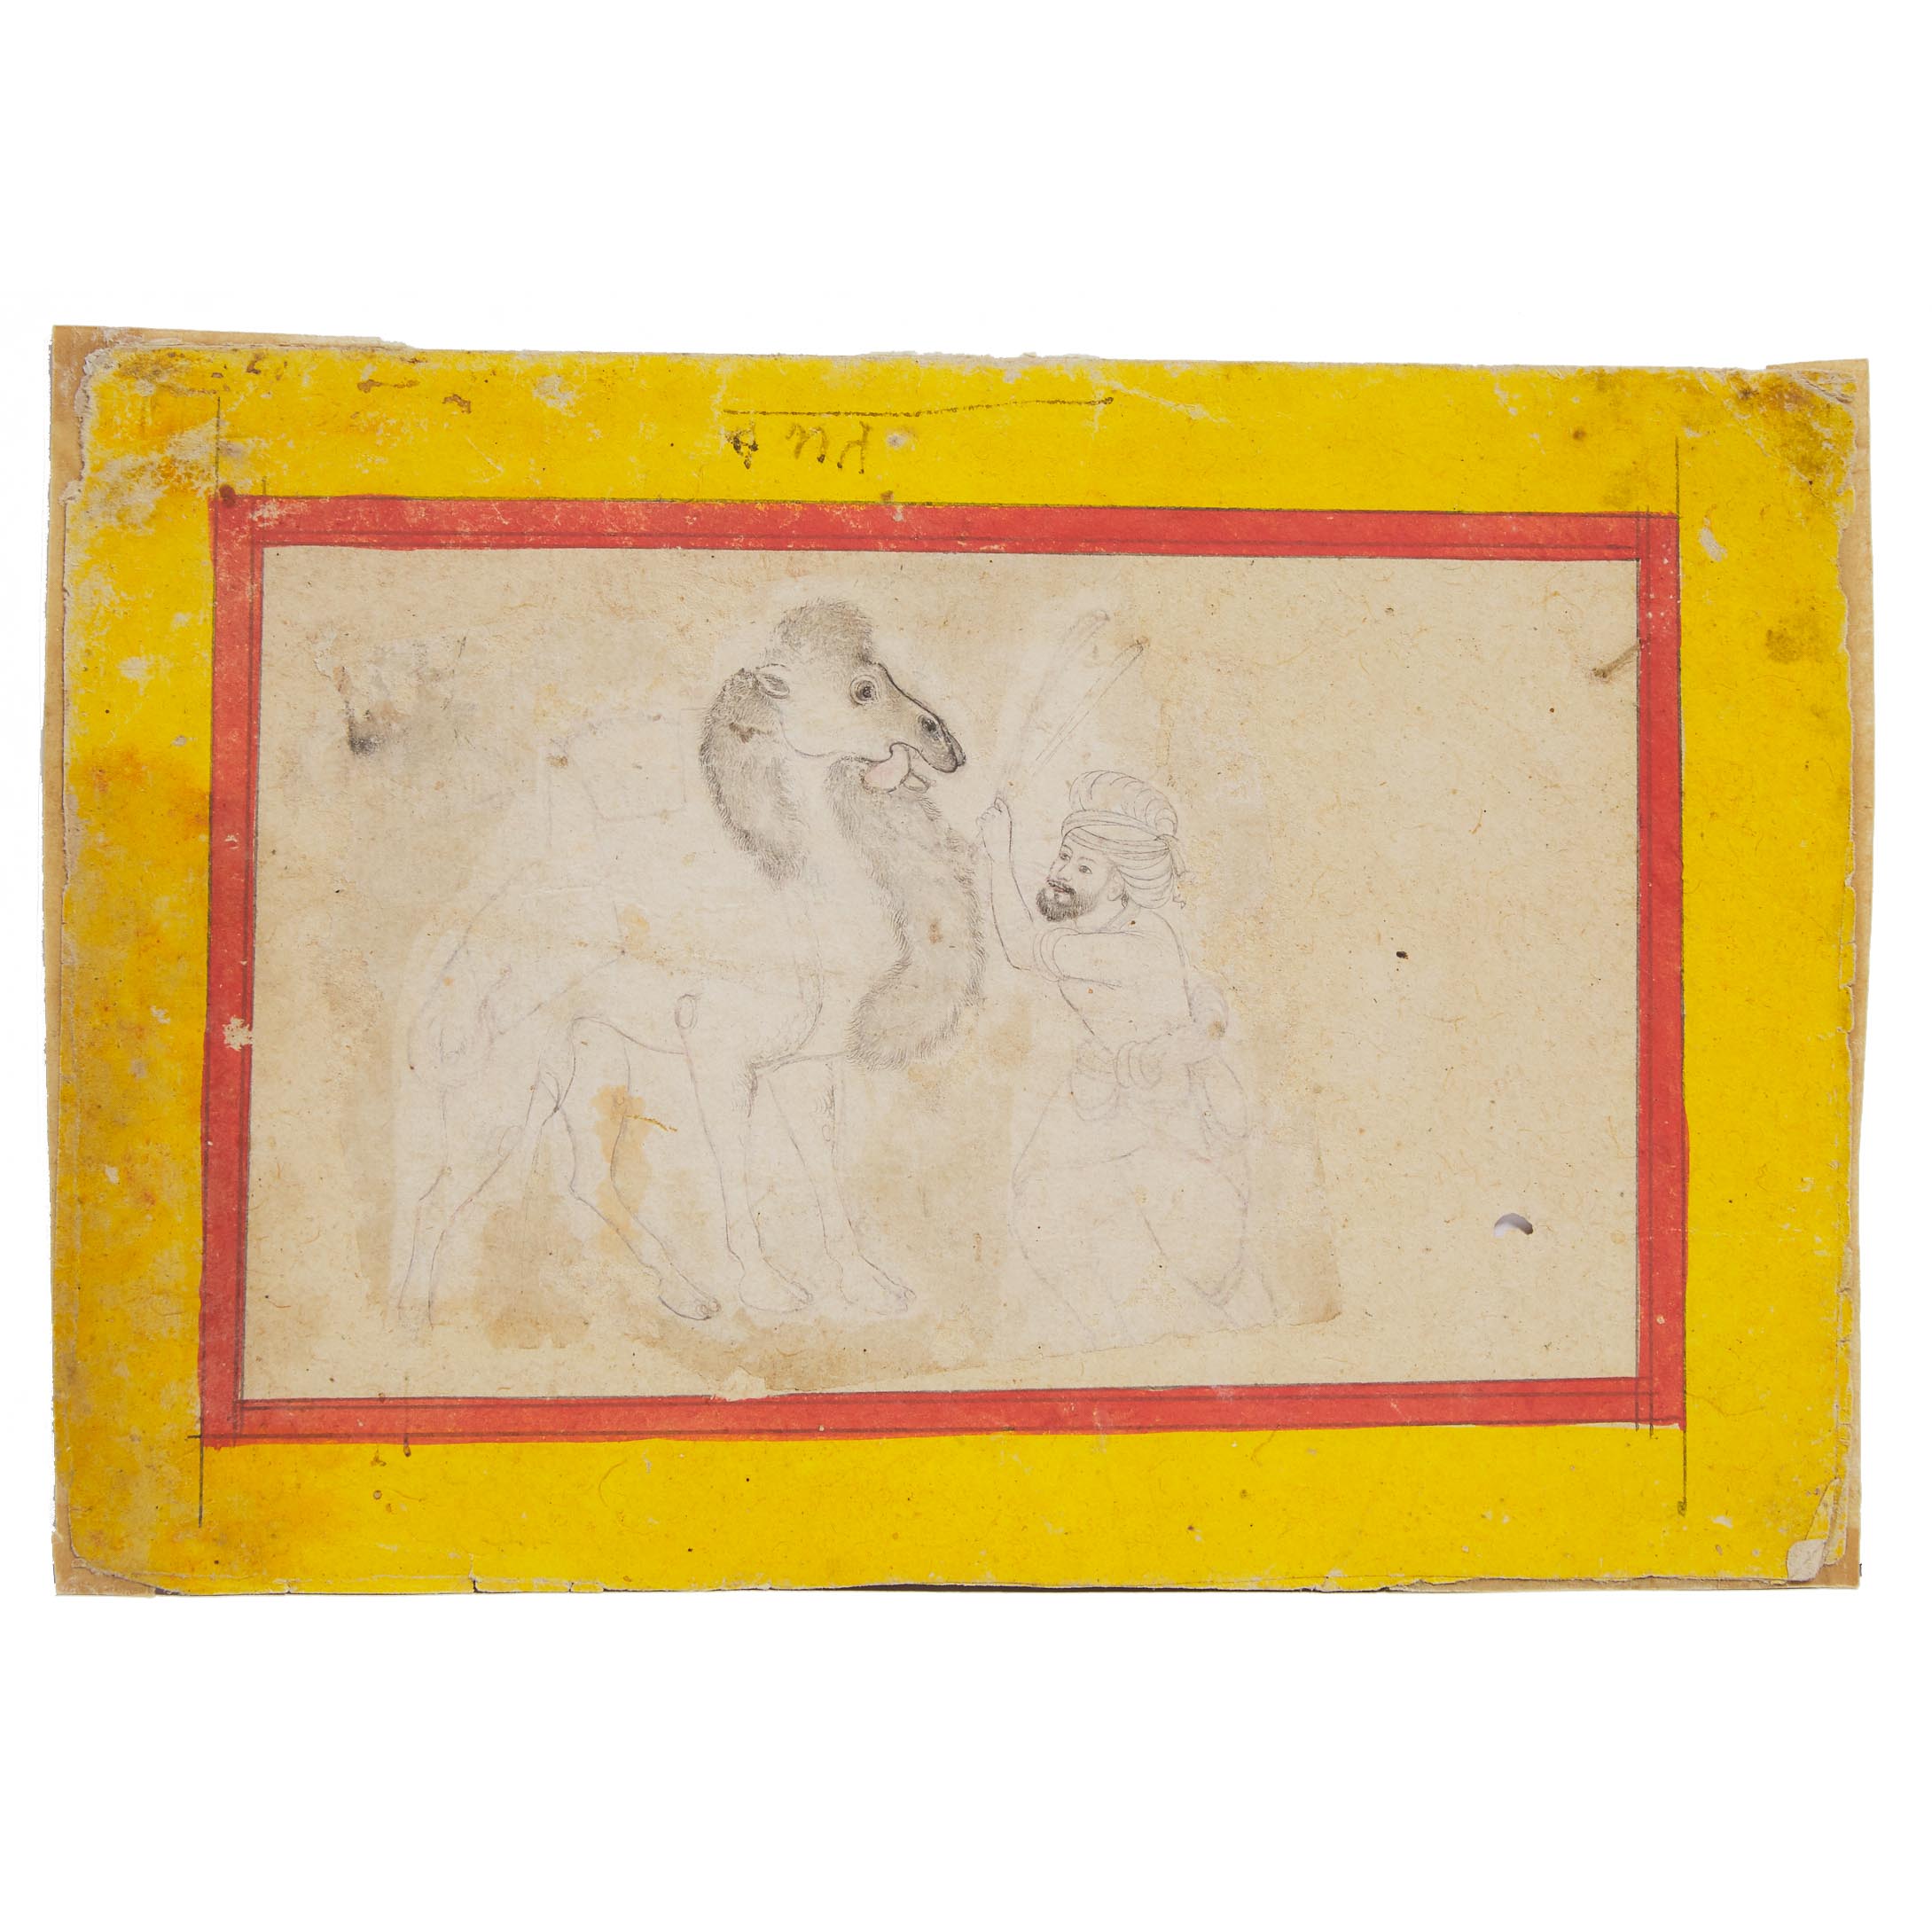 Mughal School, A Drawing of a Camel with Trainer, 17th Century or Later